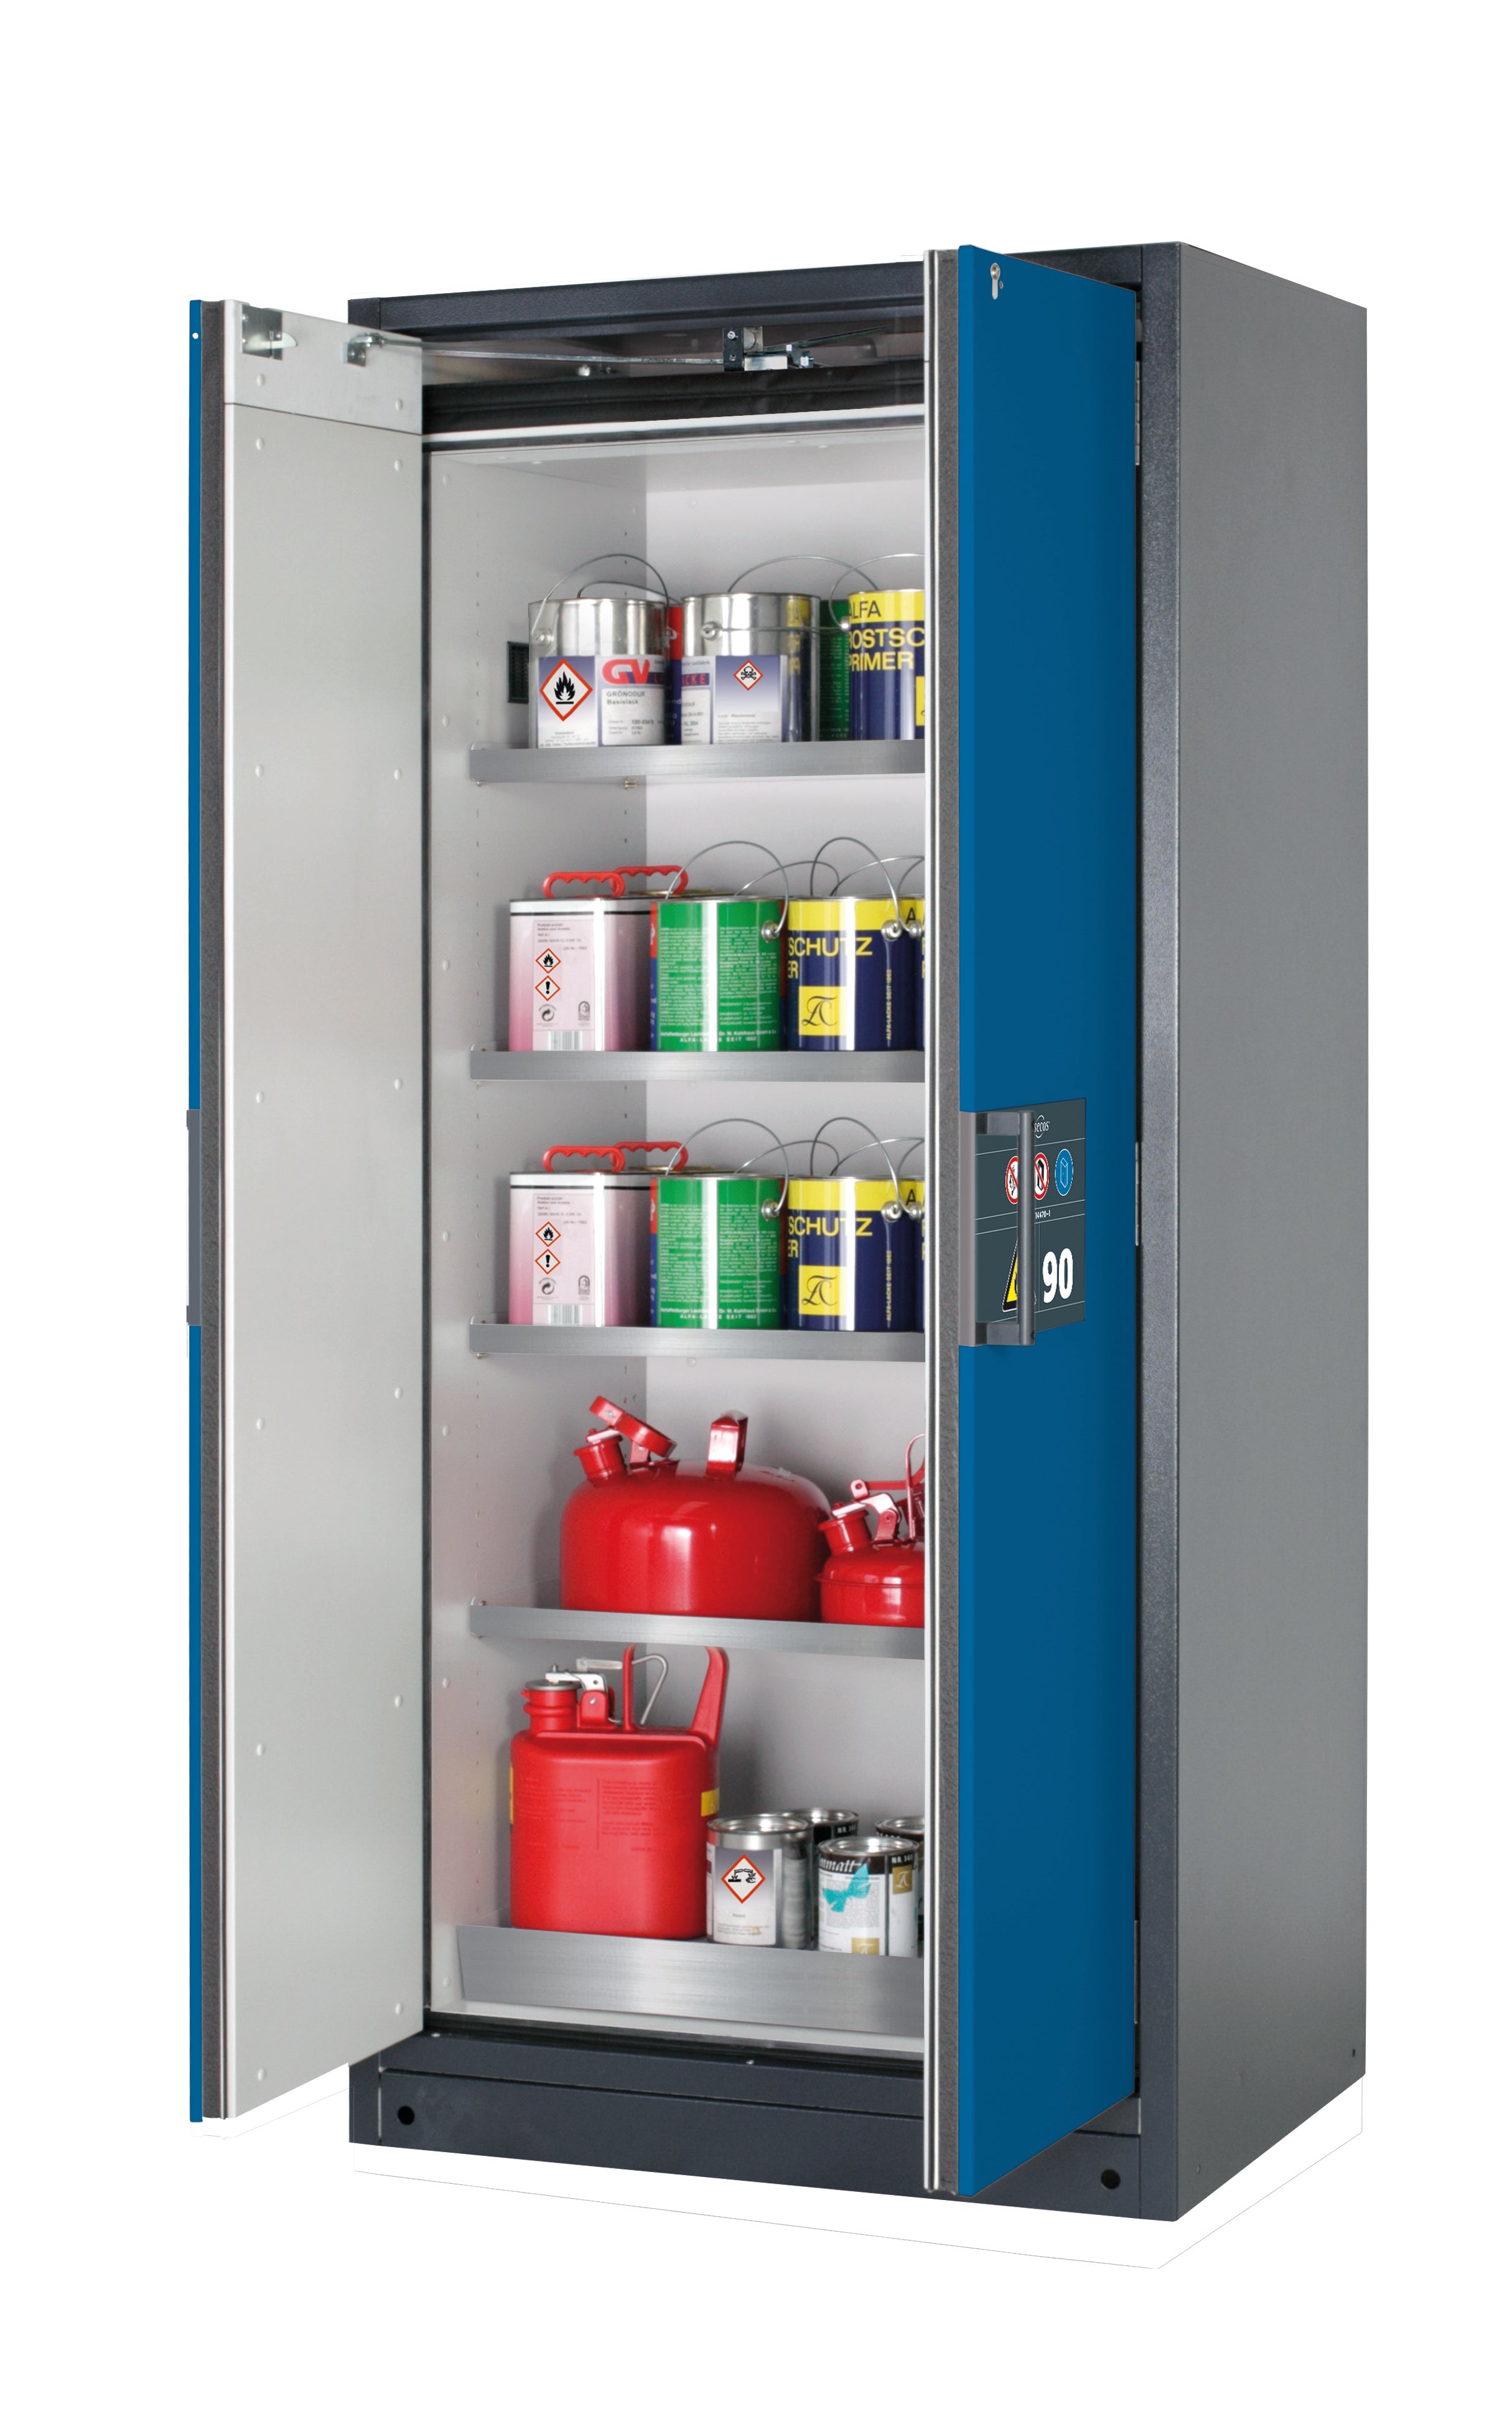 Type 90 safety storage cabinet Q-PEGASUS-90 model Q90.195.090.WDAC in gentian blue RAL 5010 with 4x shelf standard (stainless steel 1.4301),